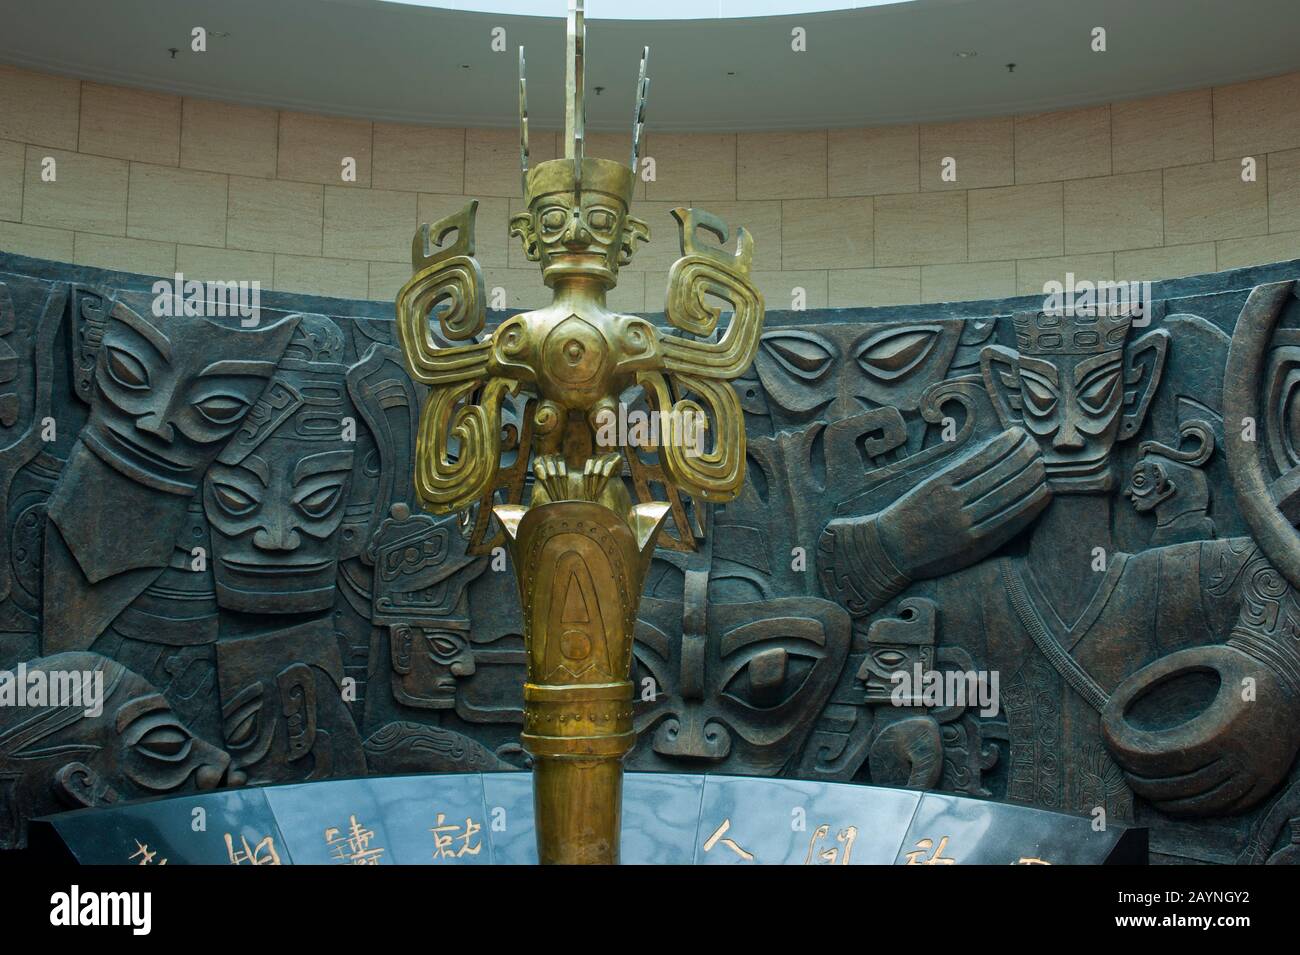 A bronze statue in the exhibit of ancient artifacts at the Sanxingdui Museum in Sanxingdui near Chengdu, Sichuan Province in China. Stock Photo